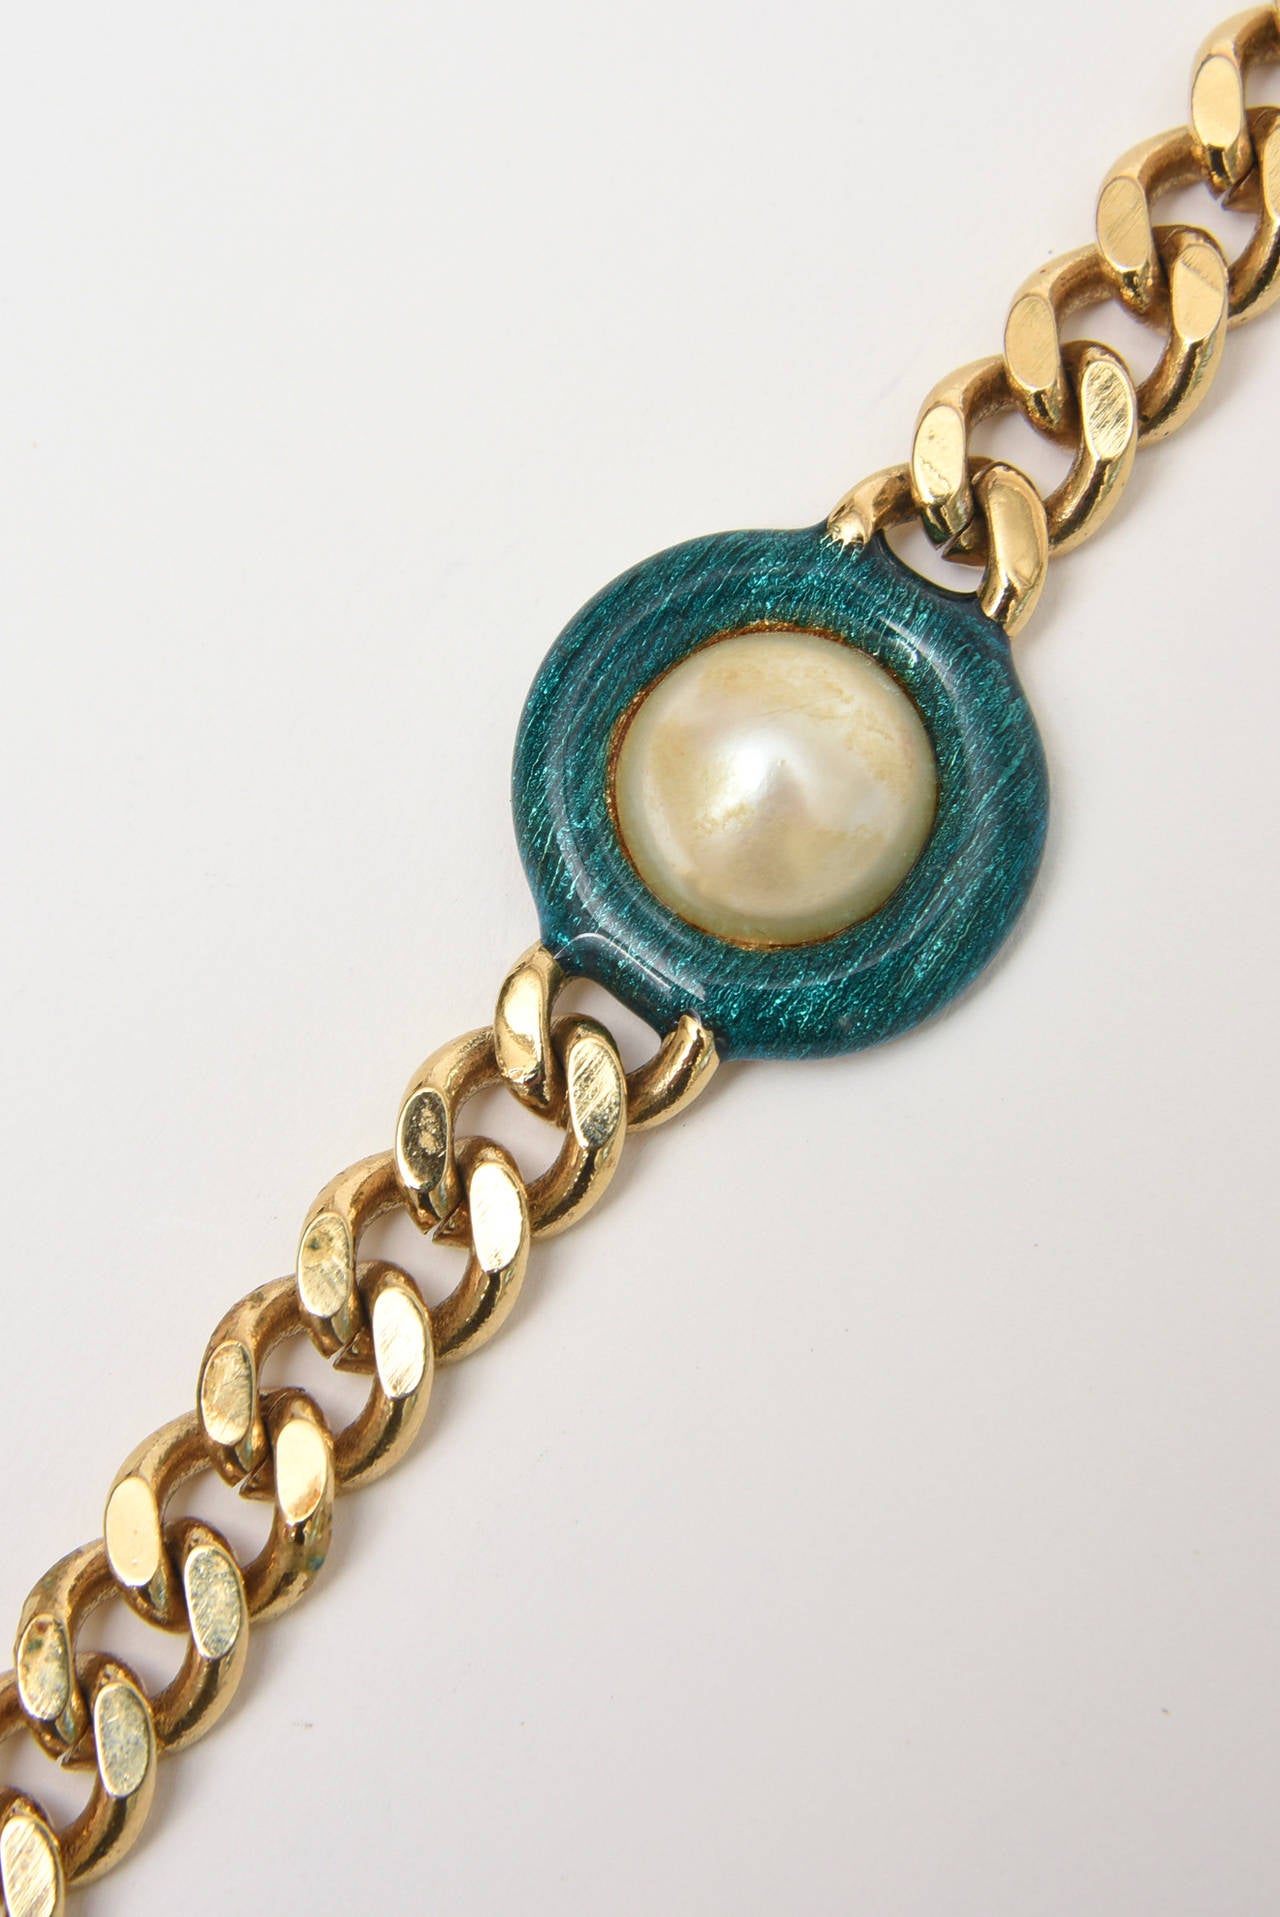 Guy Laroche Gold Tone Chain Link Strand Necklace with Enamel and Faux Pearl For Sale at 1stdibs